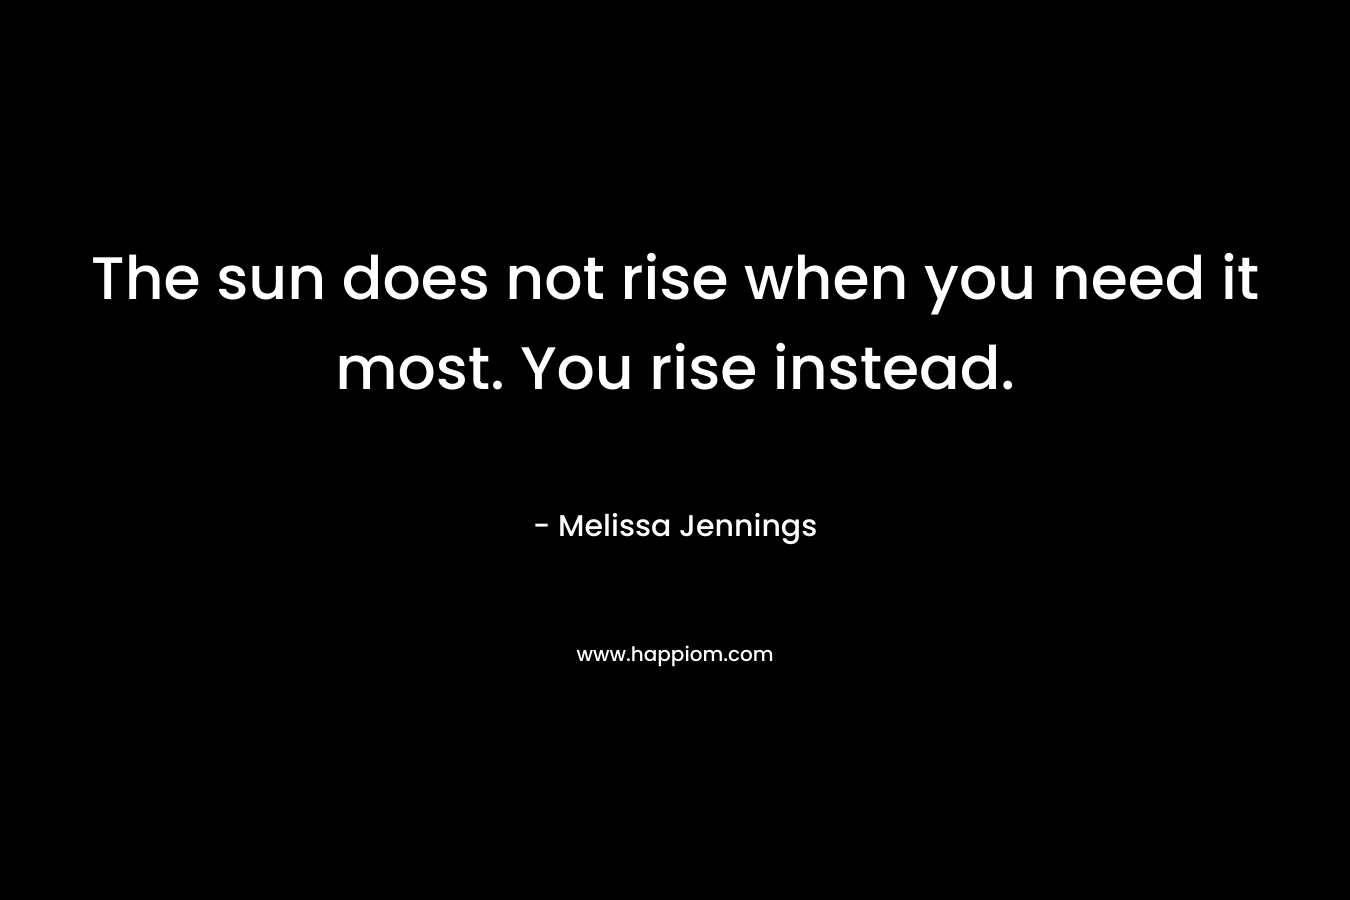 The sun does not rise when you need it most. You rise instead.